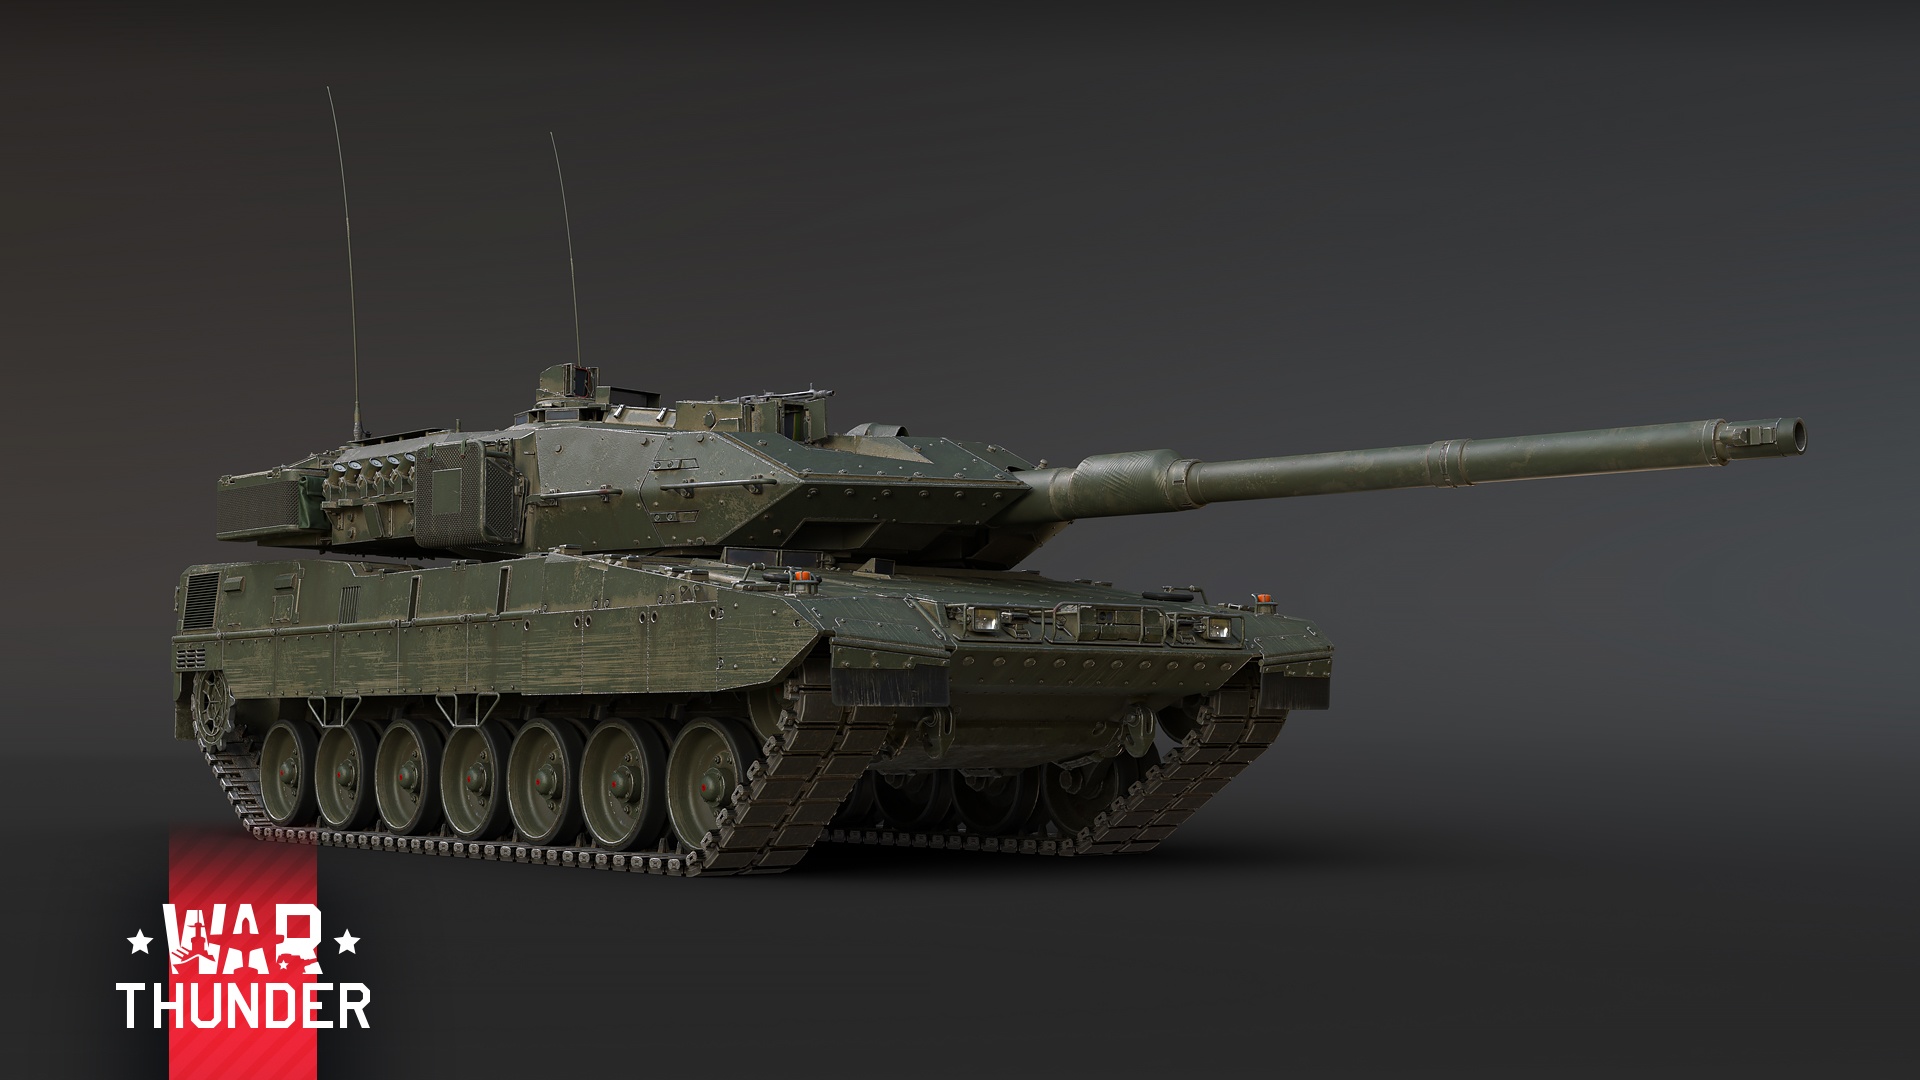 (The A7V version of the Leopard 2 looks like a regular Leo 2, but literally has serious improvements.)